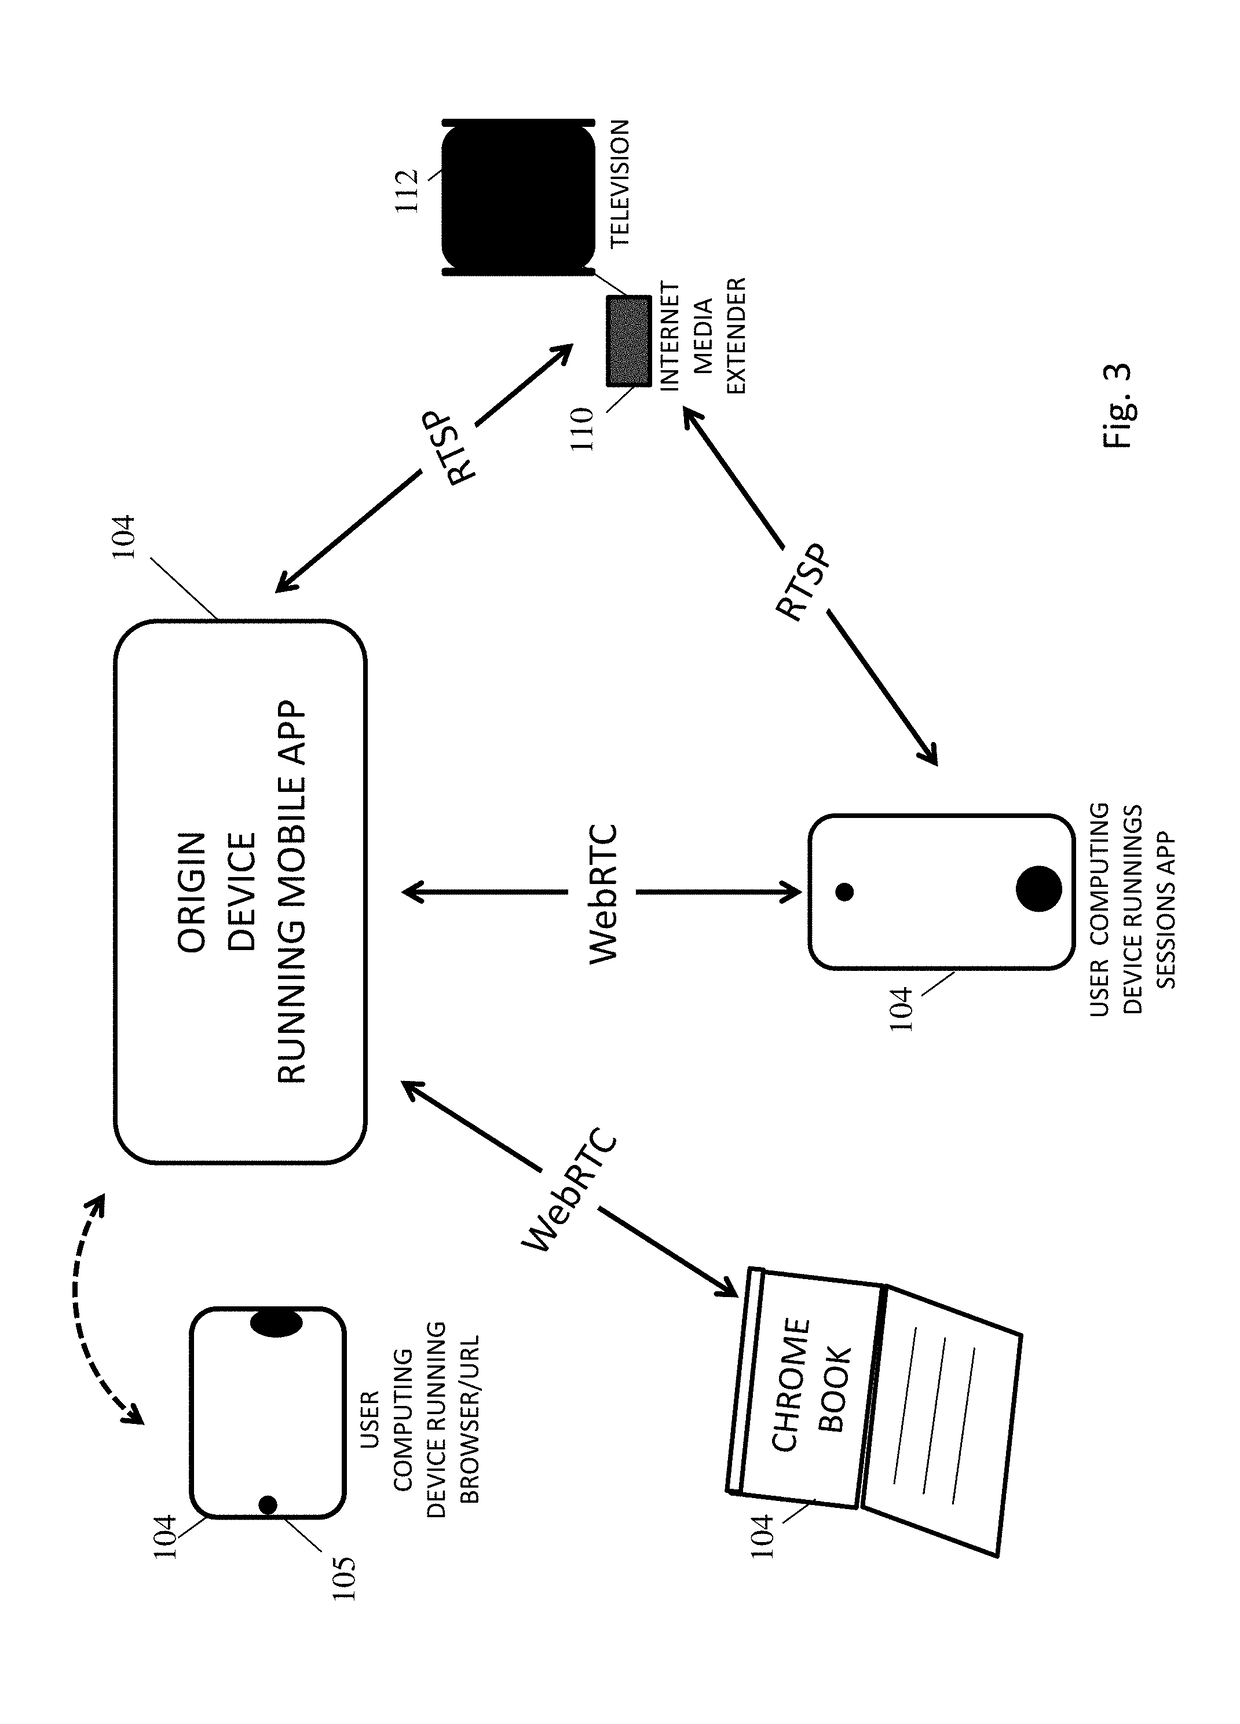 System and Method for Interactive Video Conferencing